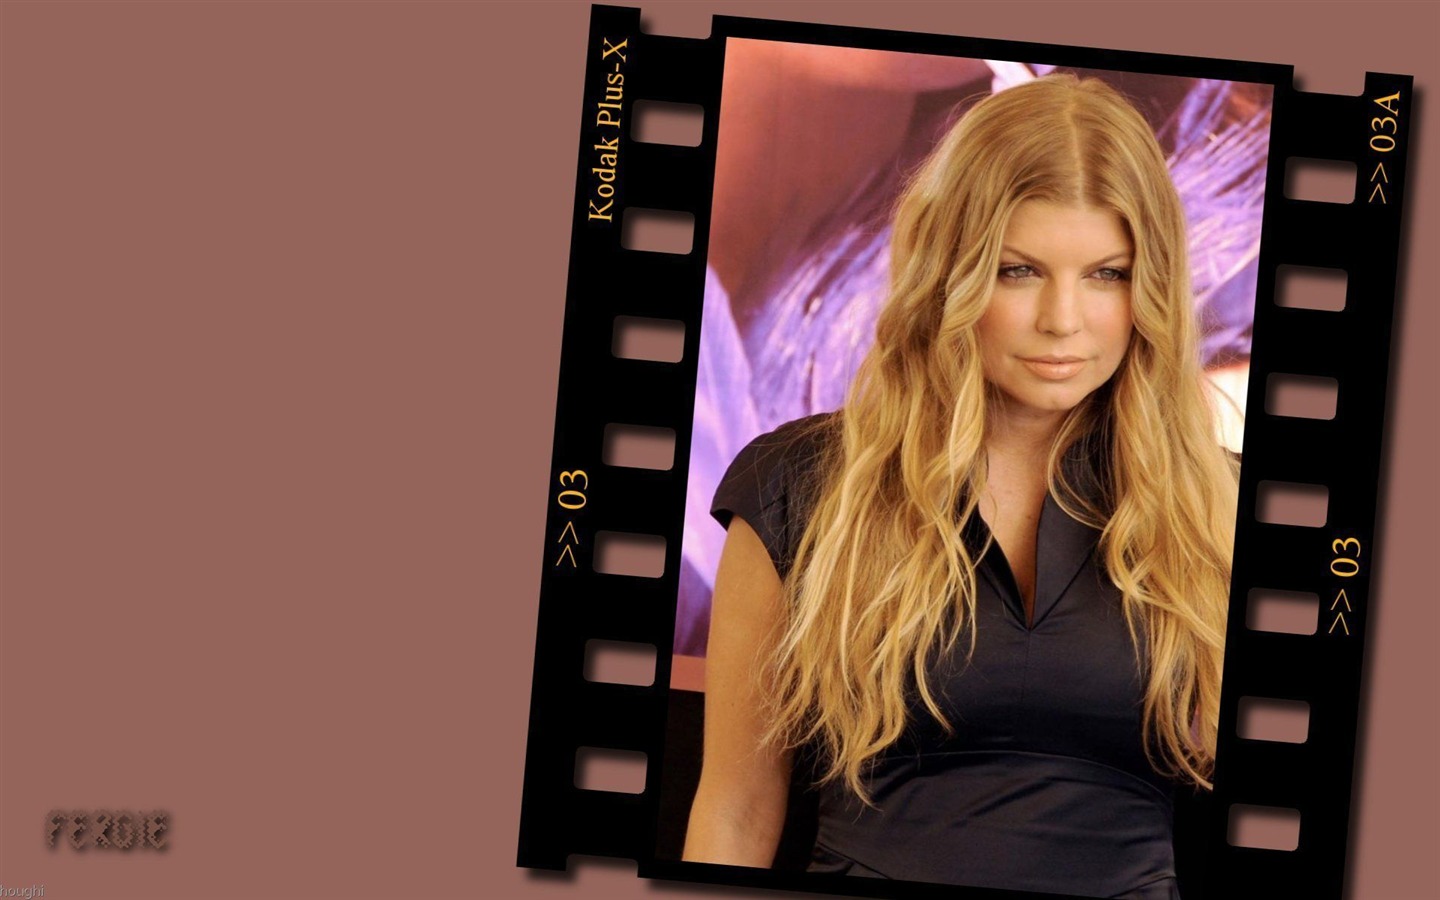 Fergie #005 - 1440x900 Wallpapers Pictures Photos Images